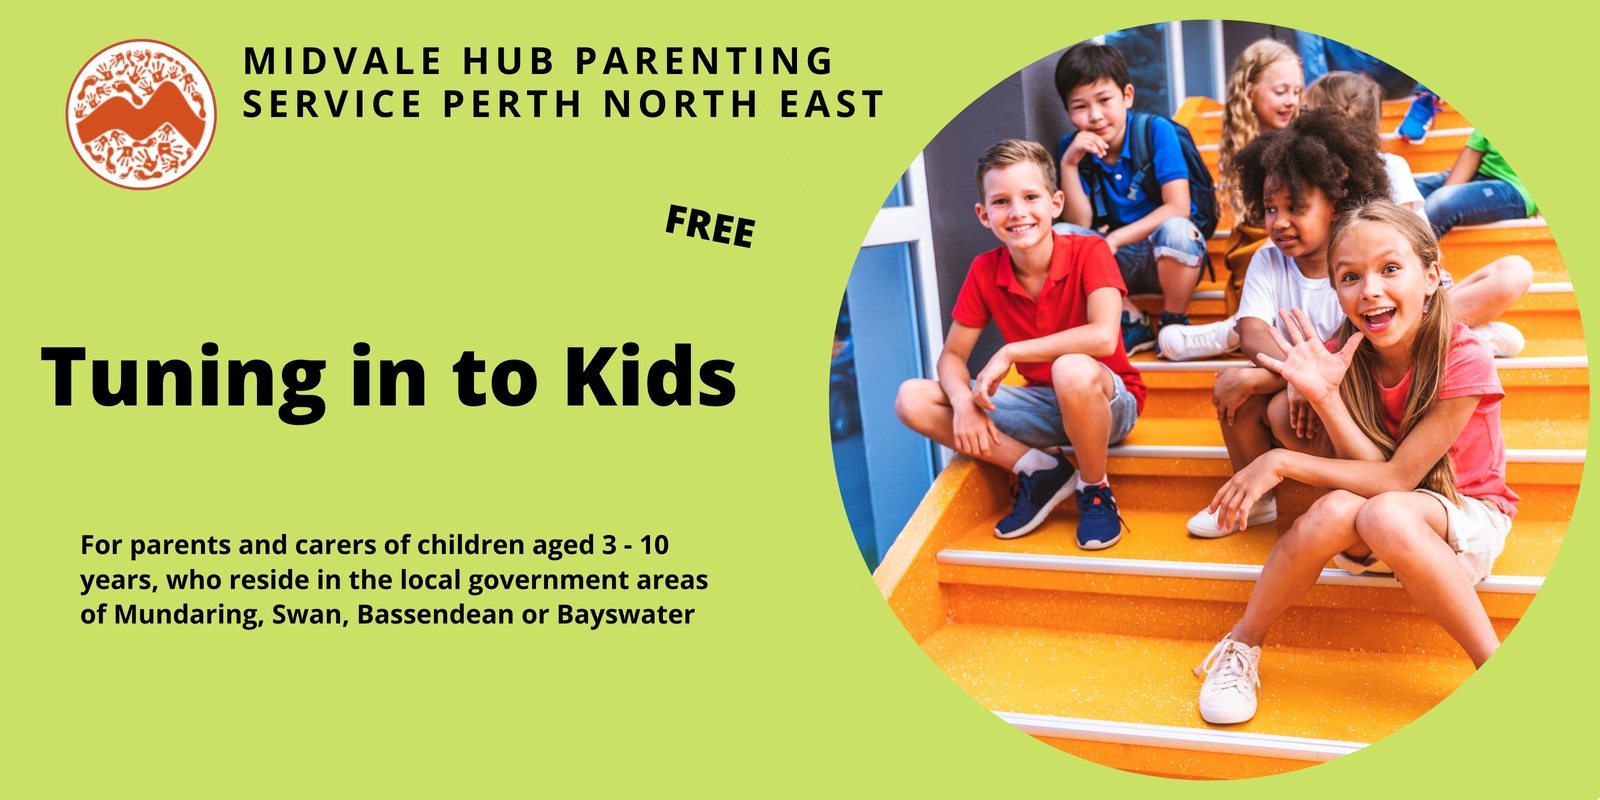 Banner image for TUNING IN TO KIDS - MAYLANDS PUBLIC LIBRARY